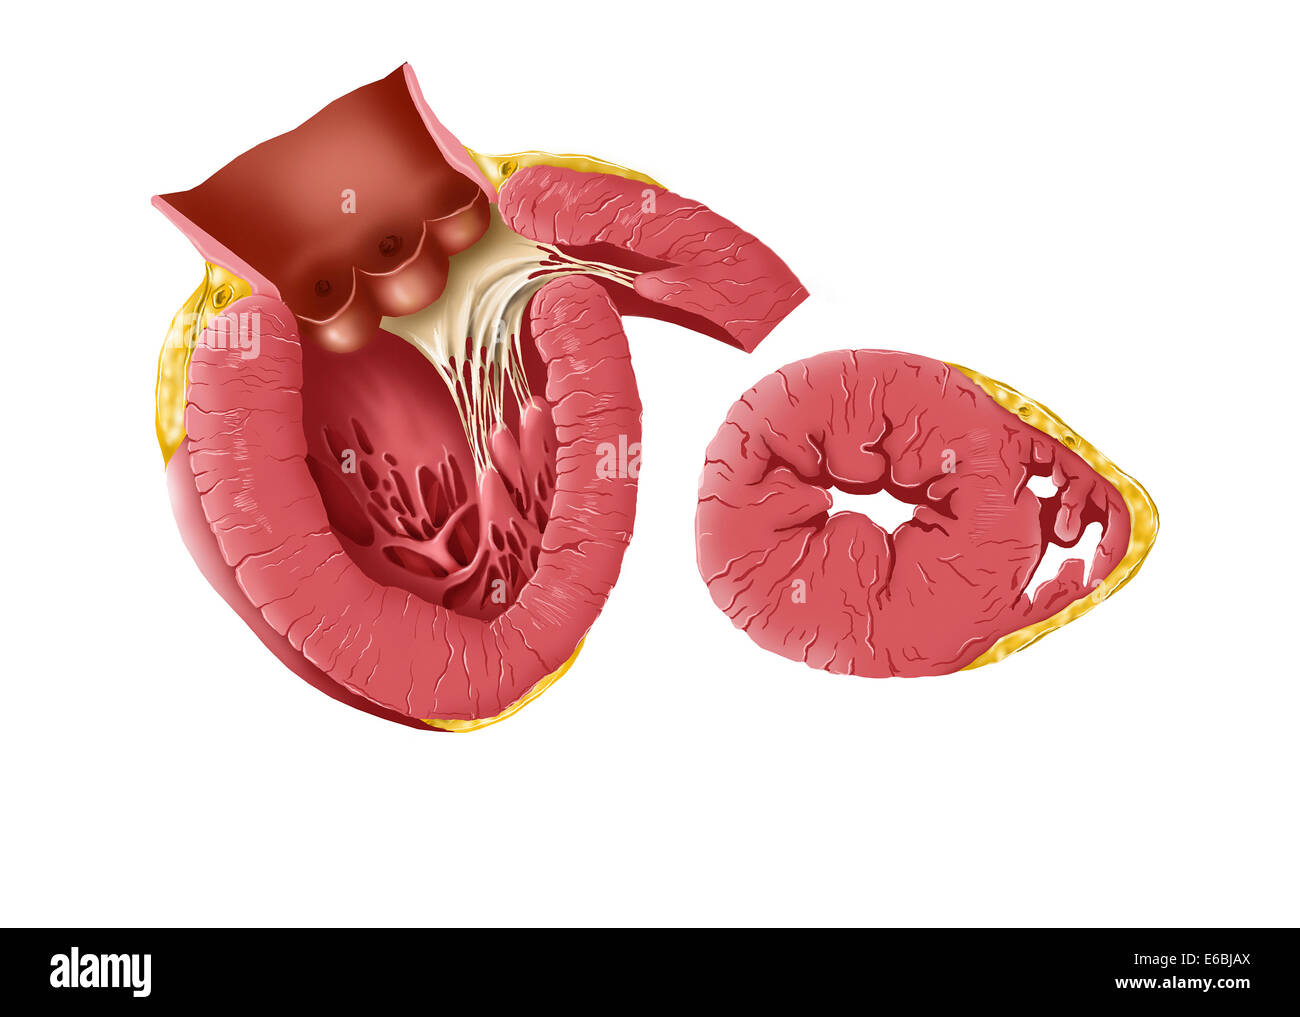 Enlarged left ventricle of the human heart. Stock Photo